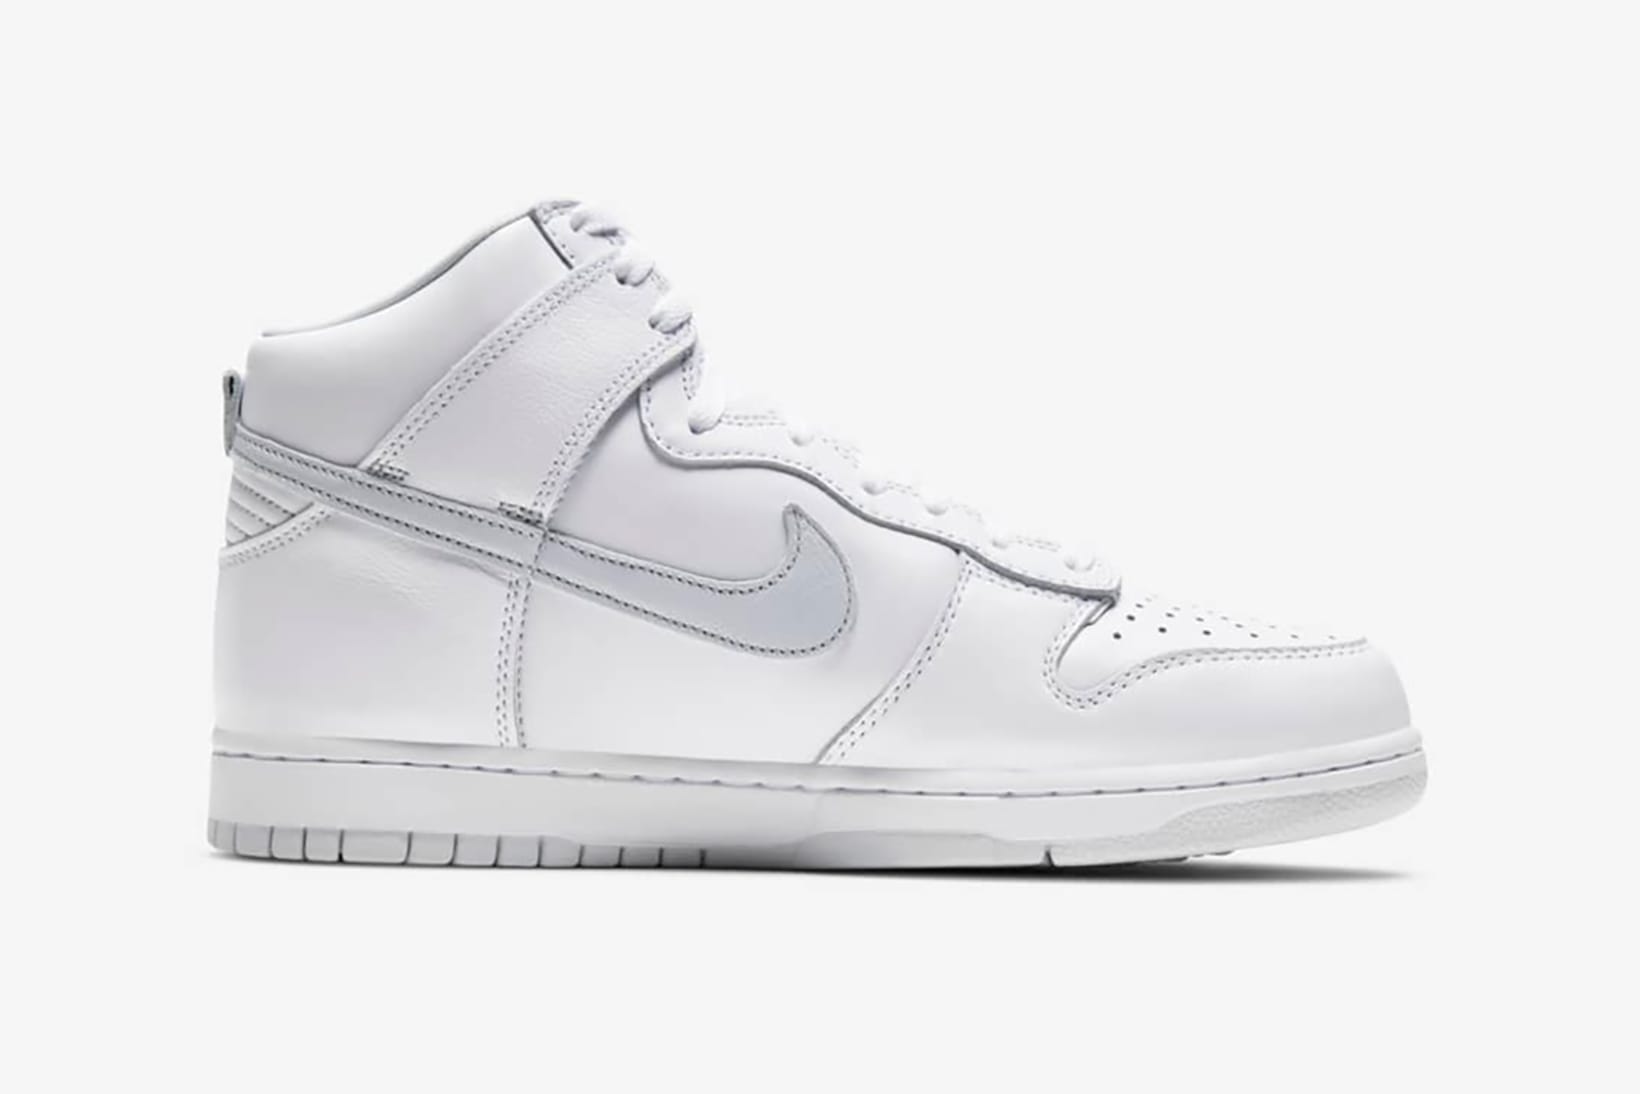 Nike Dunk High Sneakers White/Silver 